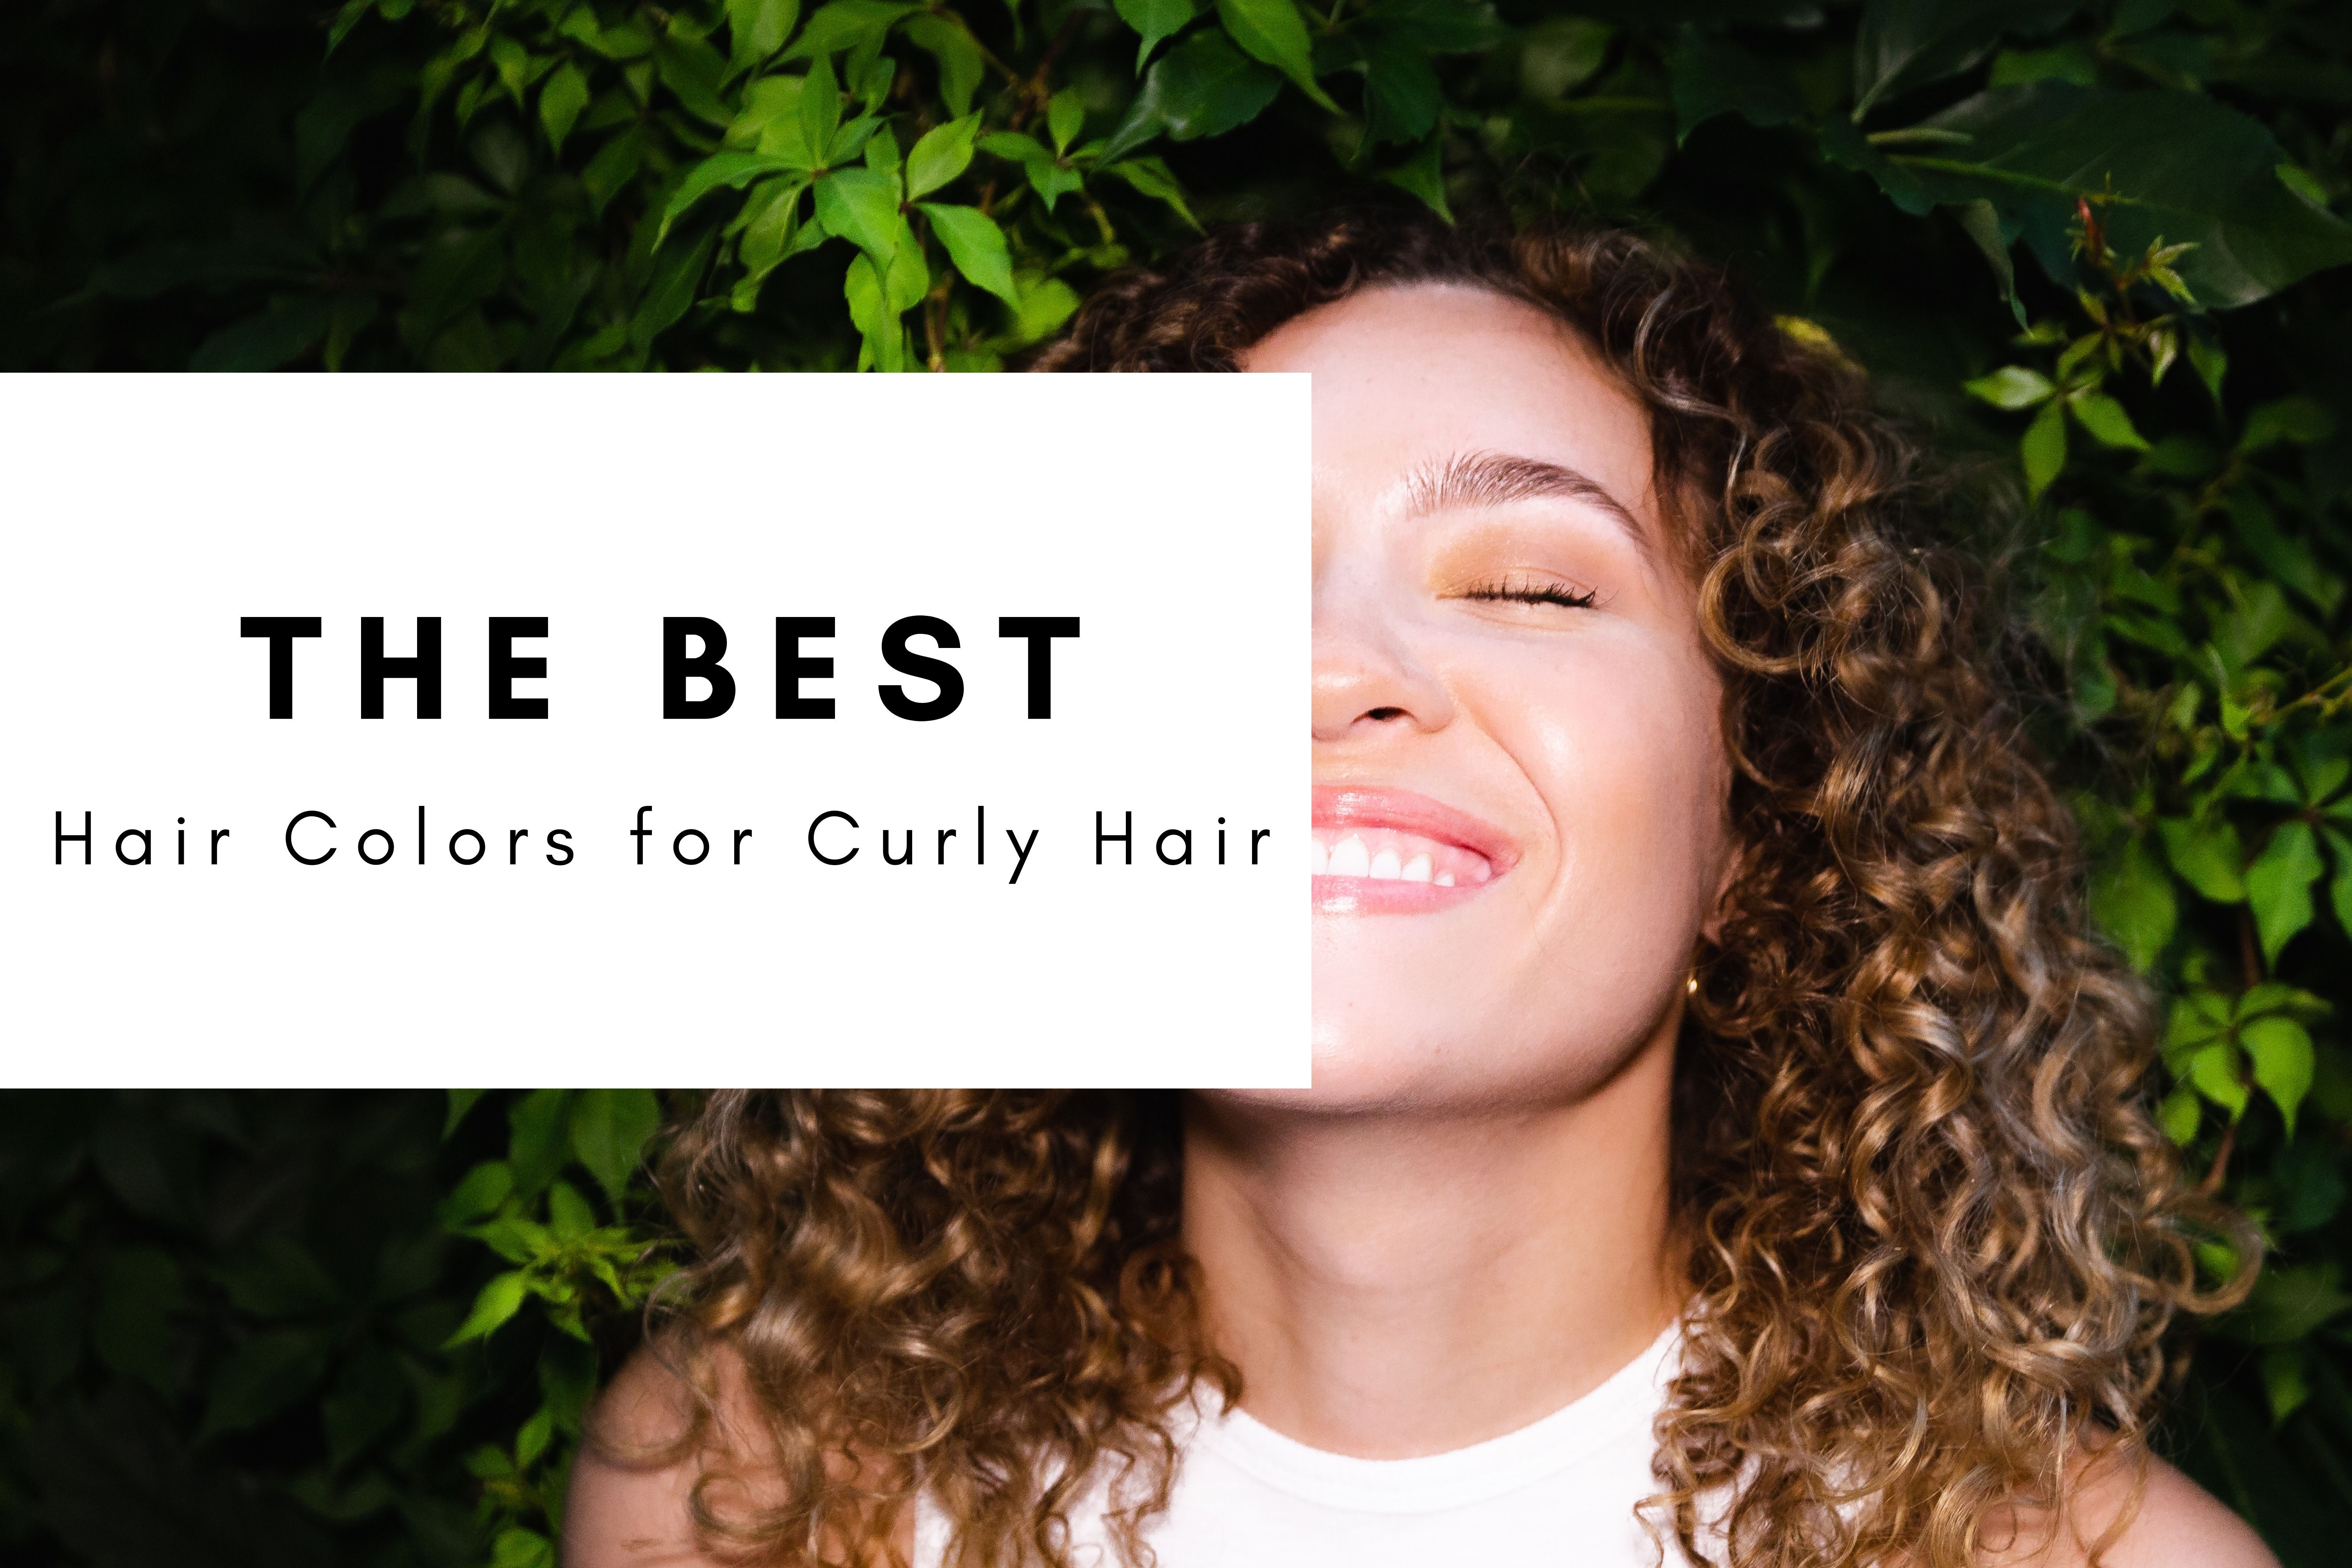 Best Hair Colors for Curly Hair